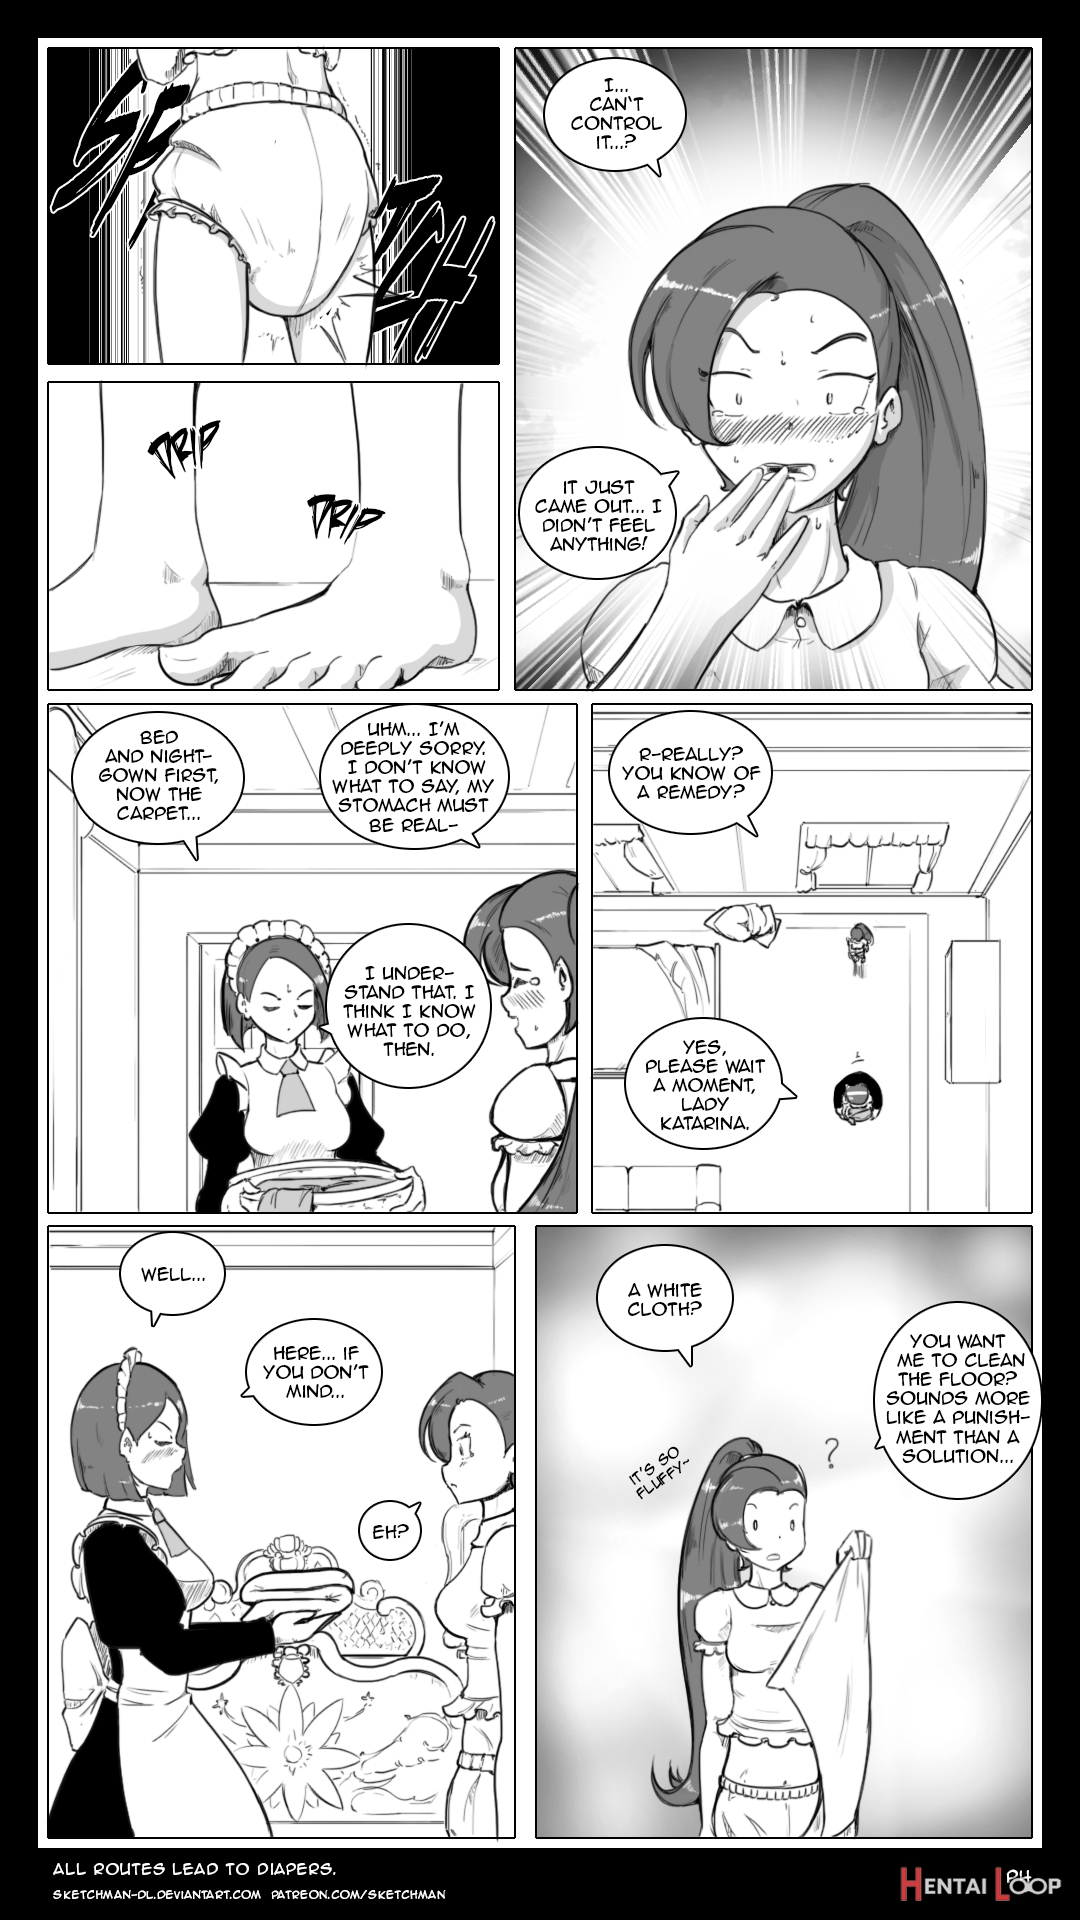 Allroutesleadtodiapers page 8